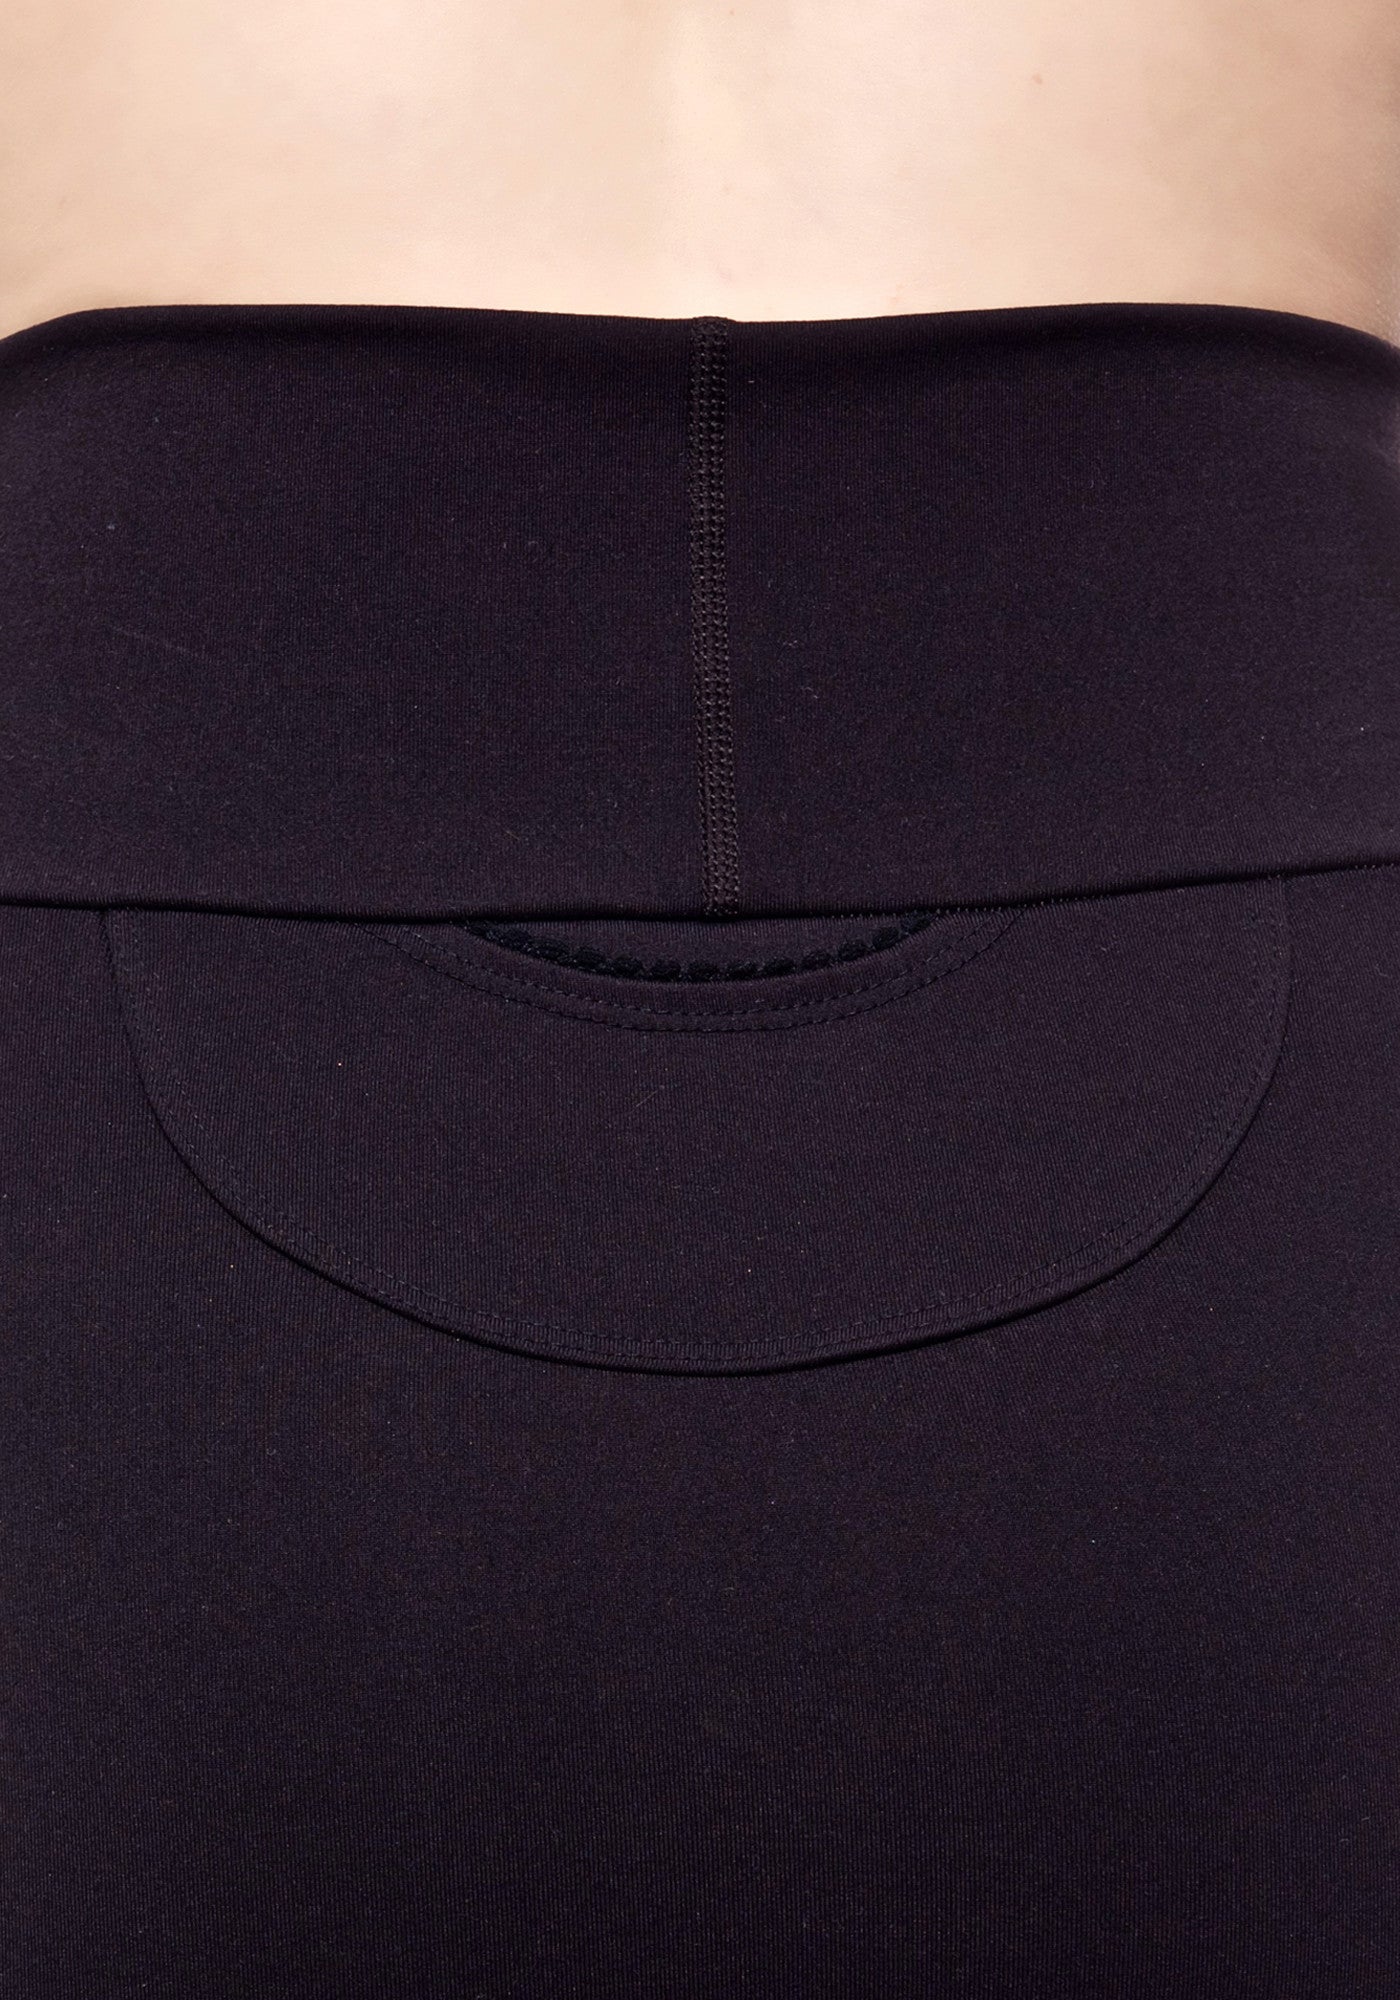 Back Pocket close up of our high waisted black mini skirt made from premium high performance activewear fabric with handy back waist pocket